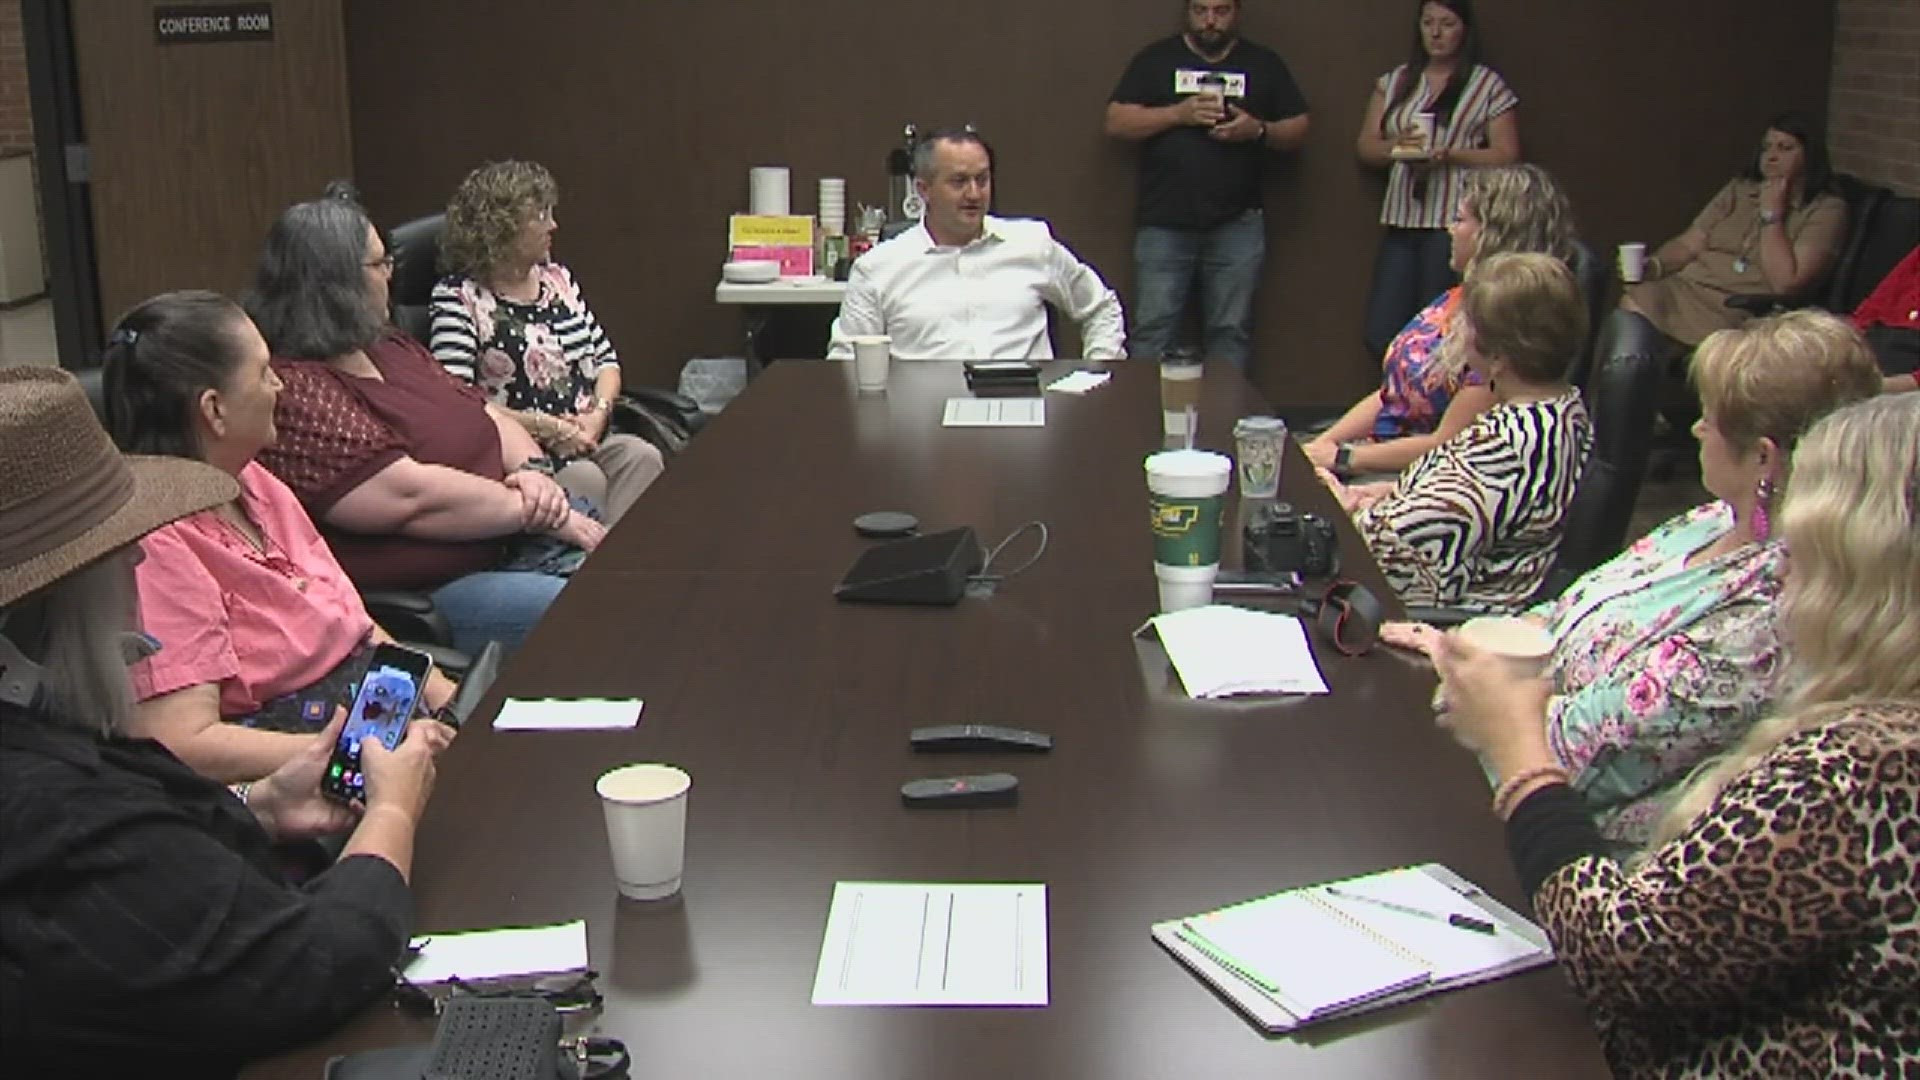 They discussed potential changes they could see from past legislative sessions and how it could affect their business.